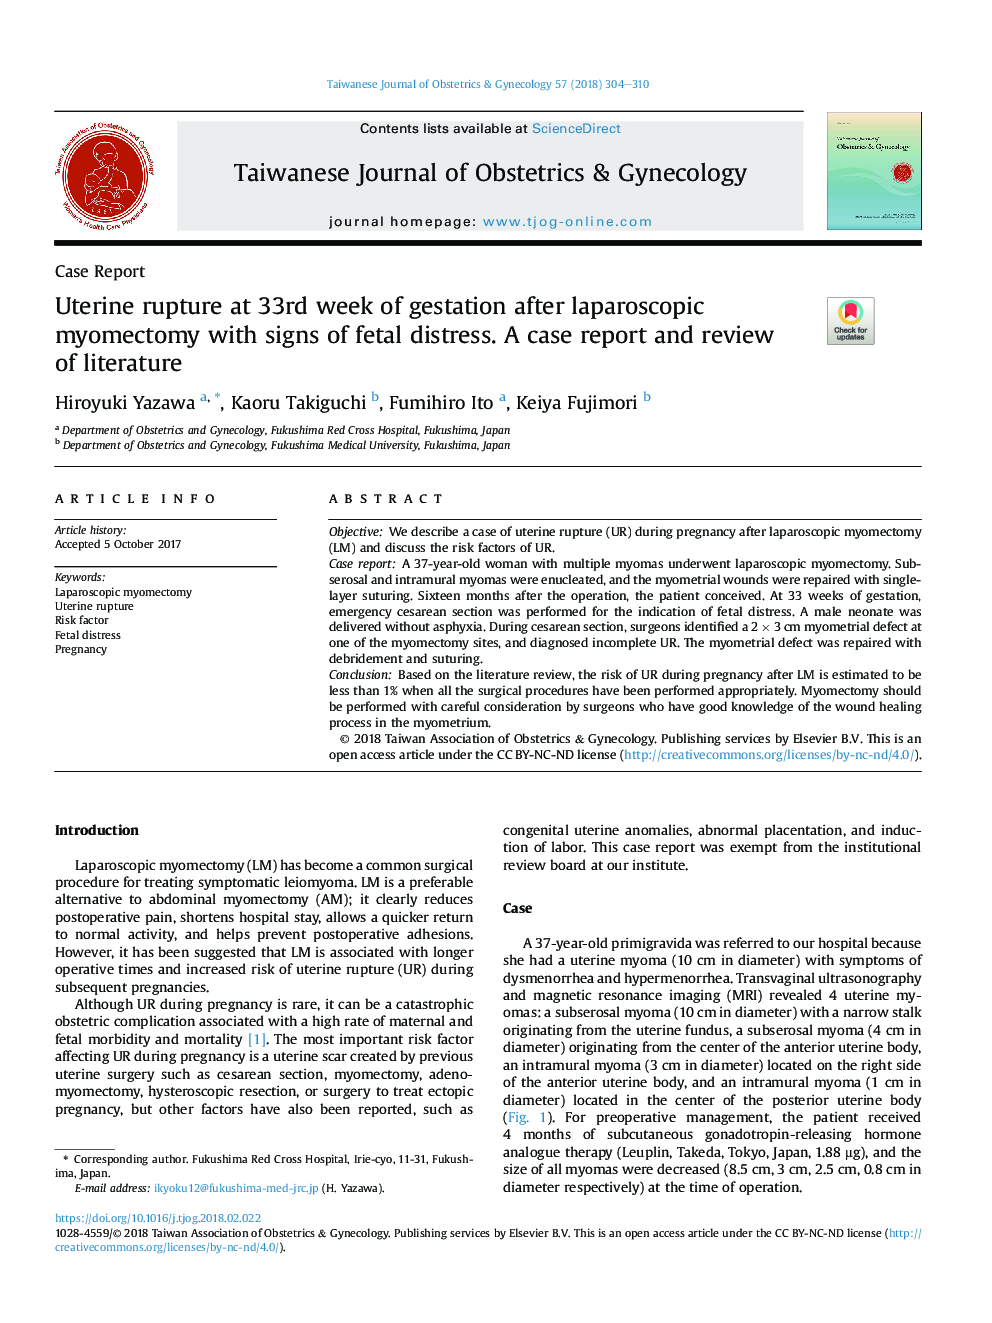 Uterine rupture at 33rd week of gestation after laparoscopic myomectomy with signs of fetal distress. A case report and review of literature